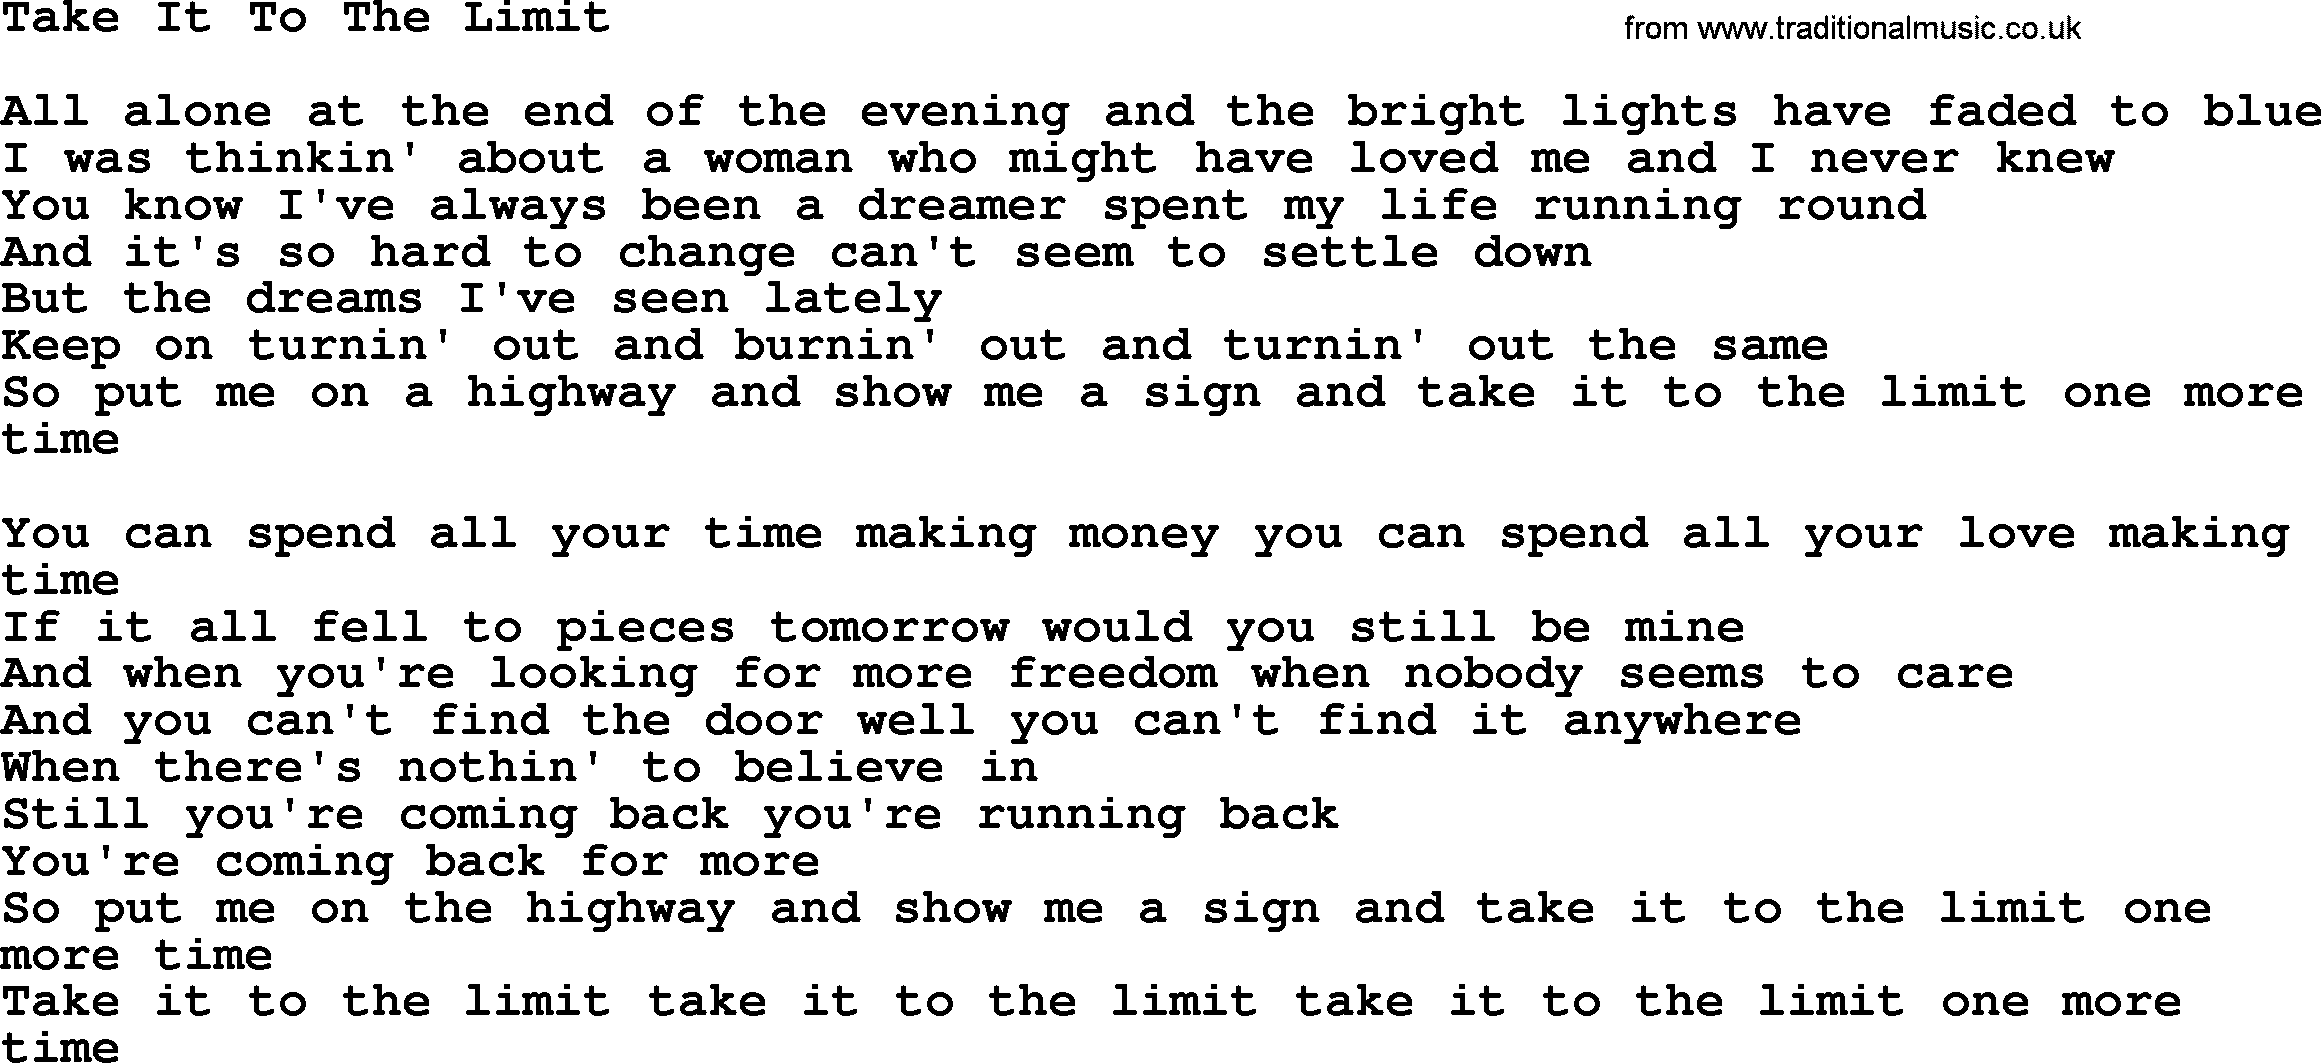 Willie Nelson song: Take It To The Limit lyrics